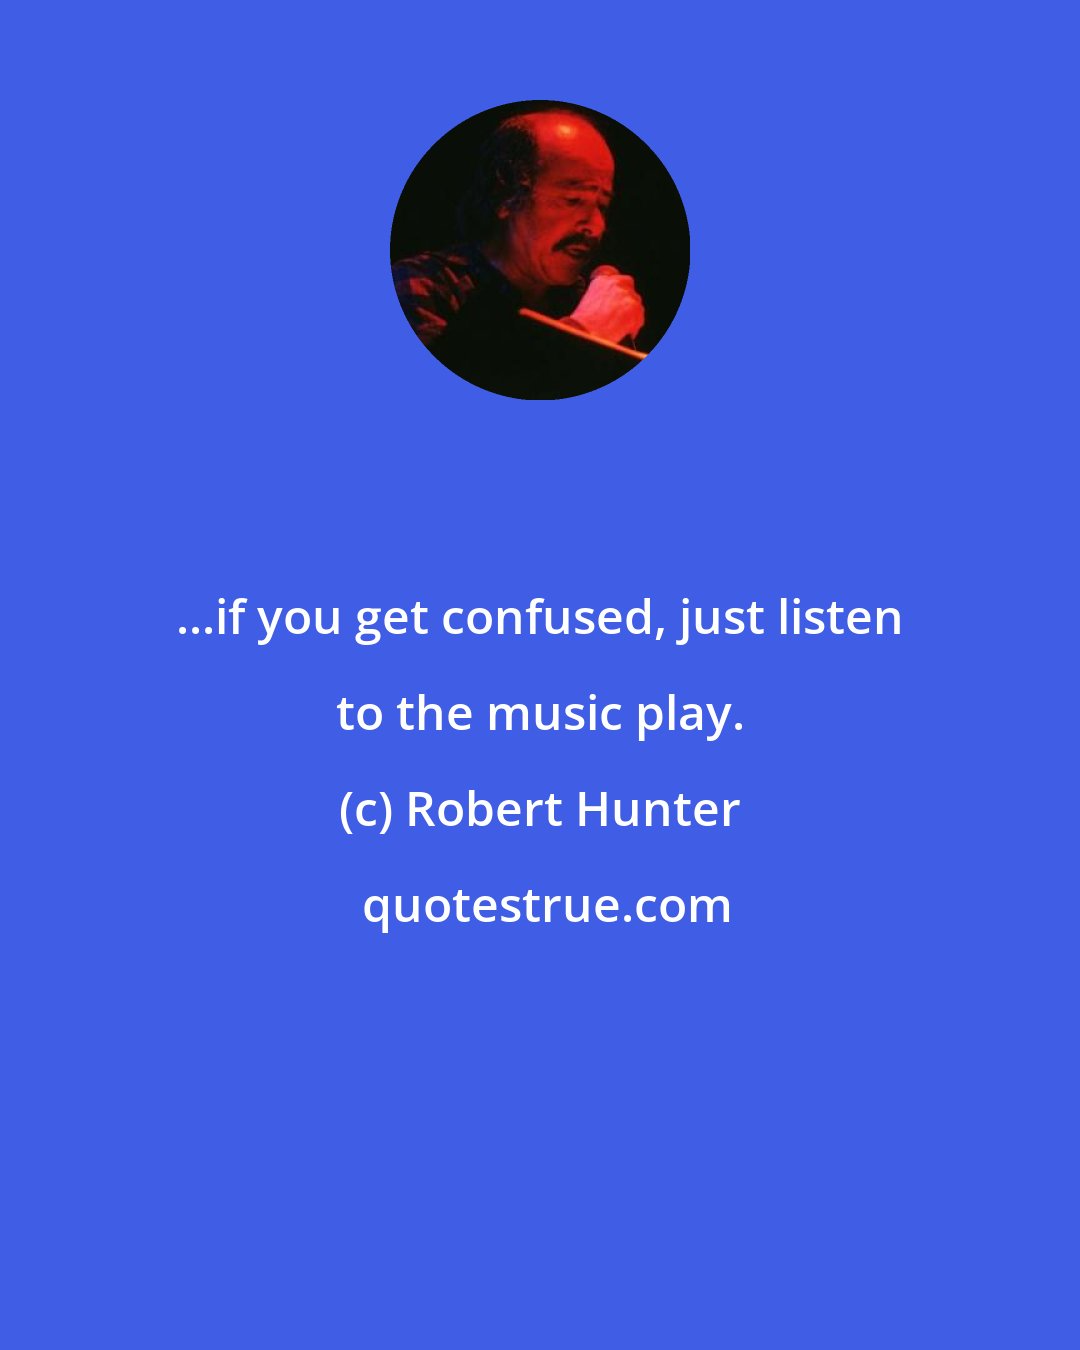 Robert Hunter: ...if you get confused, just listen to the music play.